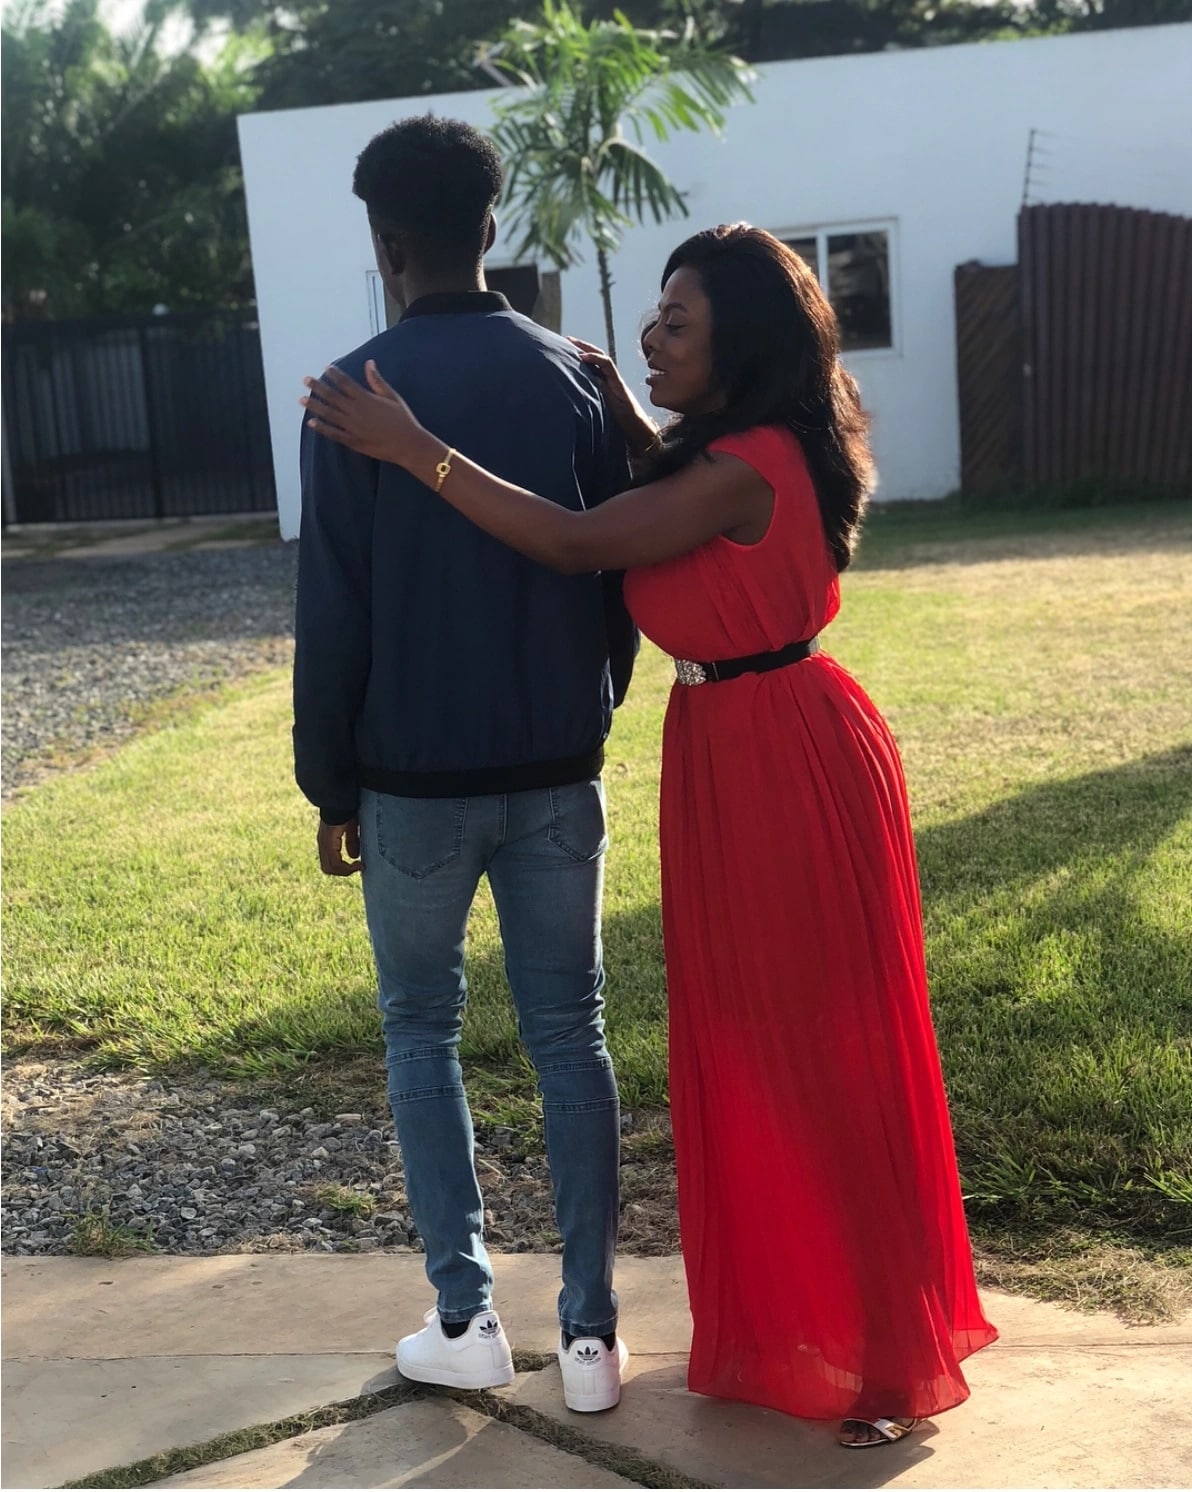 Latest photos of Nana Aba Anamoah's handsome son get fans drooling